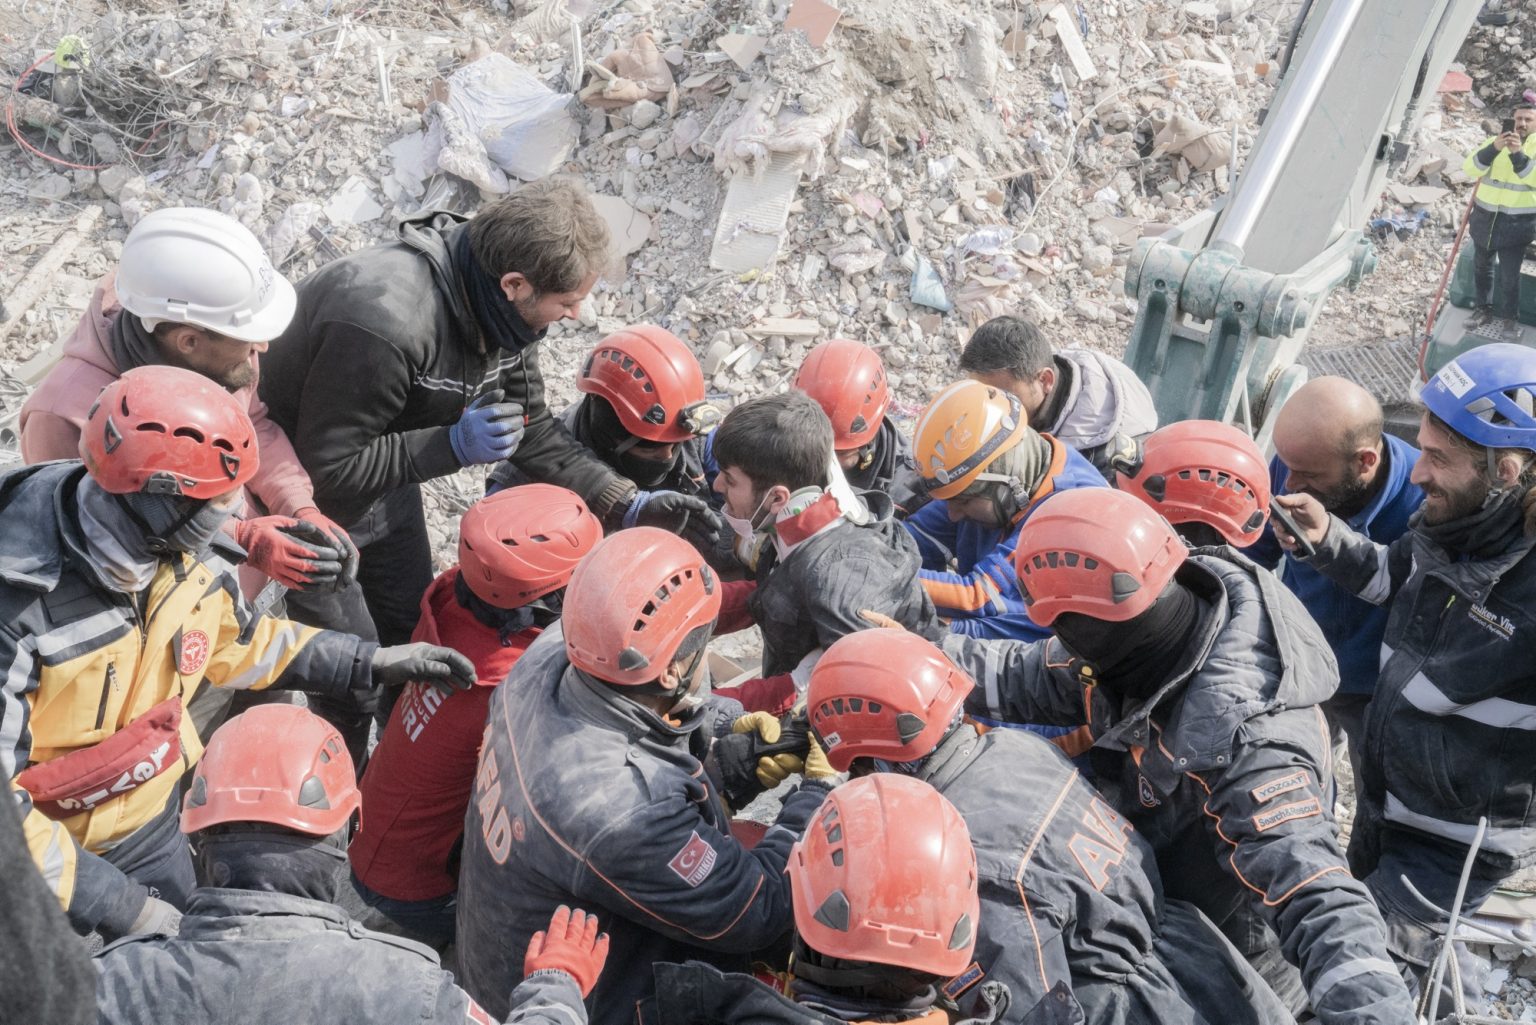 Kahramanmaras¸, Turkey, February 2023 - The aftermath of the earthquake that hit southern Turkey and northern Syria.     Ibrahim Kantarci, 29, is pulled out still alive under the rubble of a collapsed building. ><
Kahramanmaras¸, Turchia, febbraio 2023  Le conseguenze del terremoto che ha colpito la Turchia del Sud e la Siria del nord.